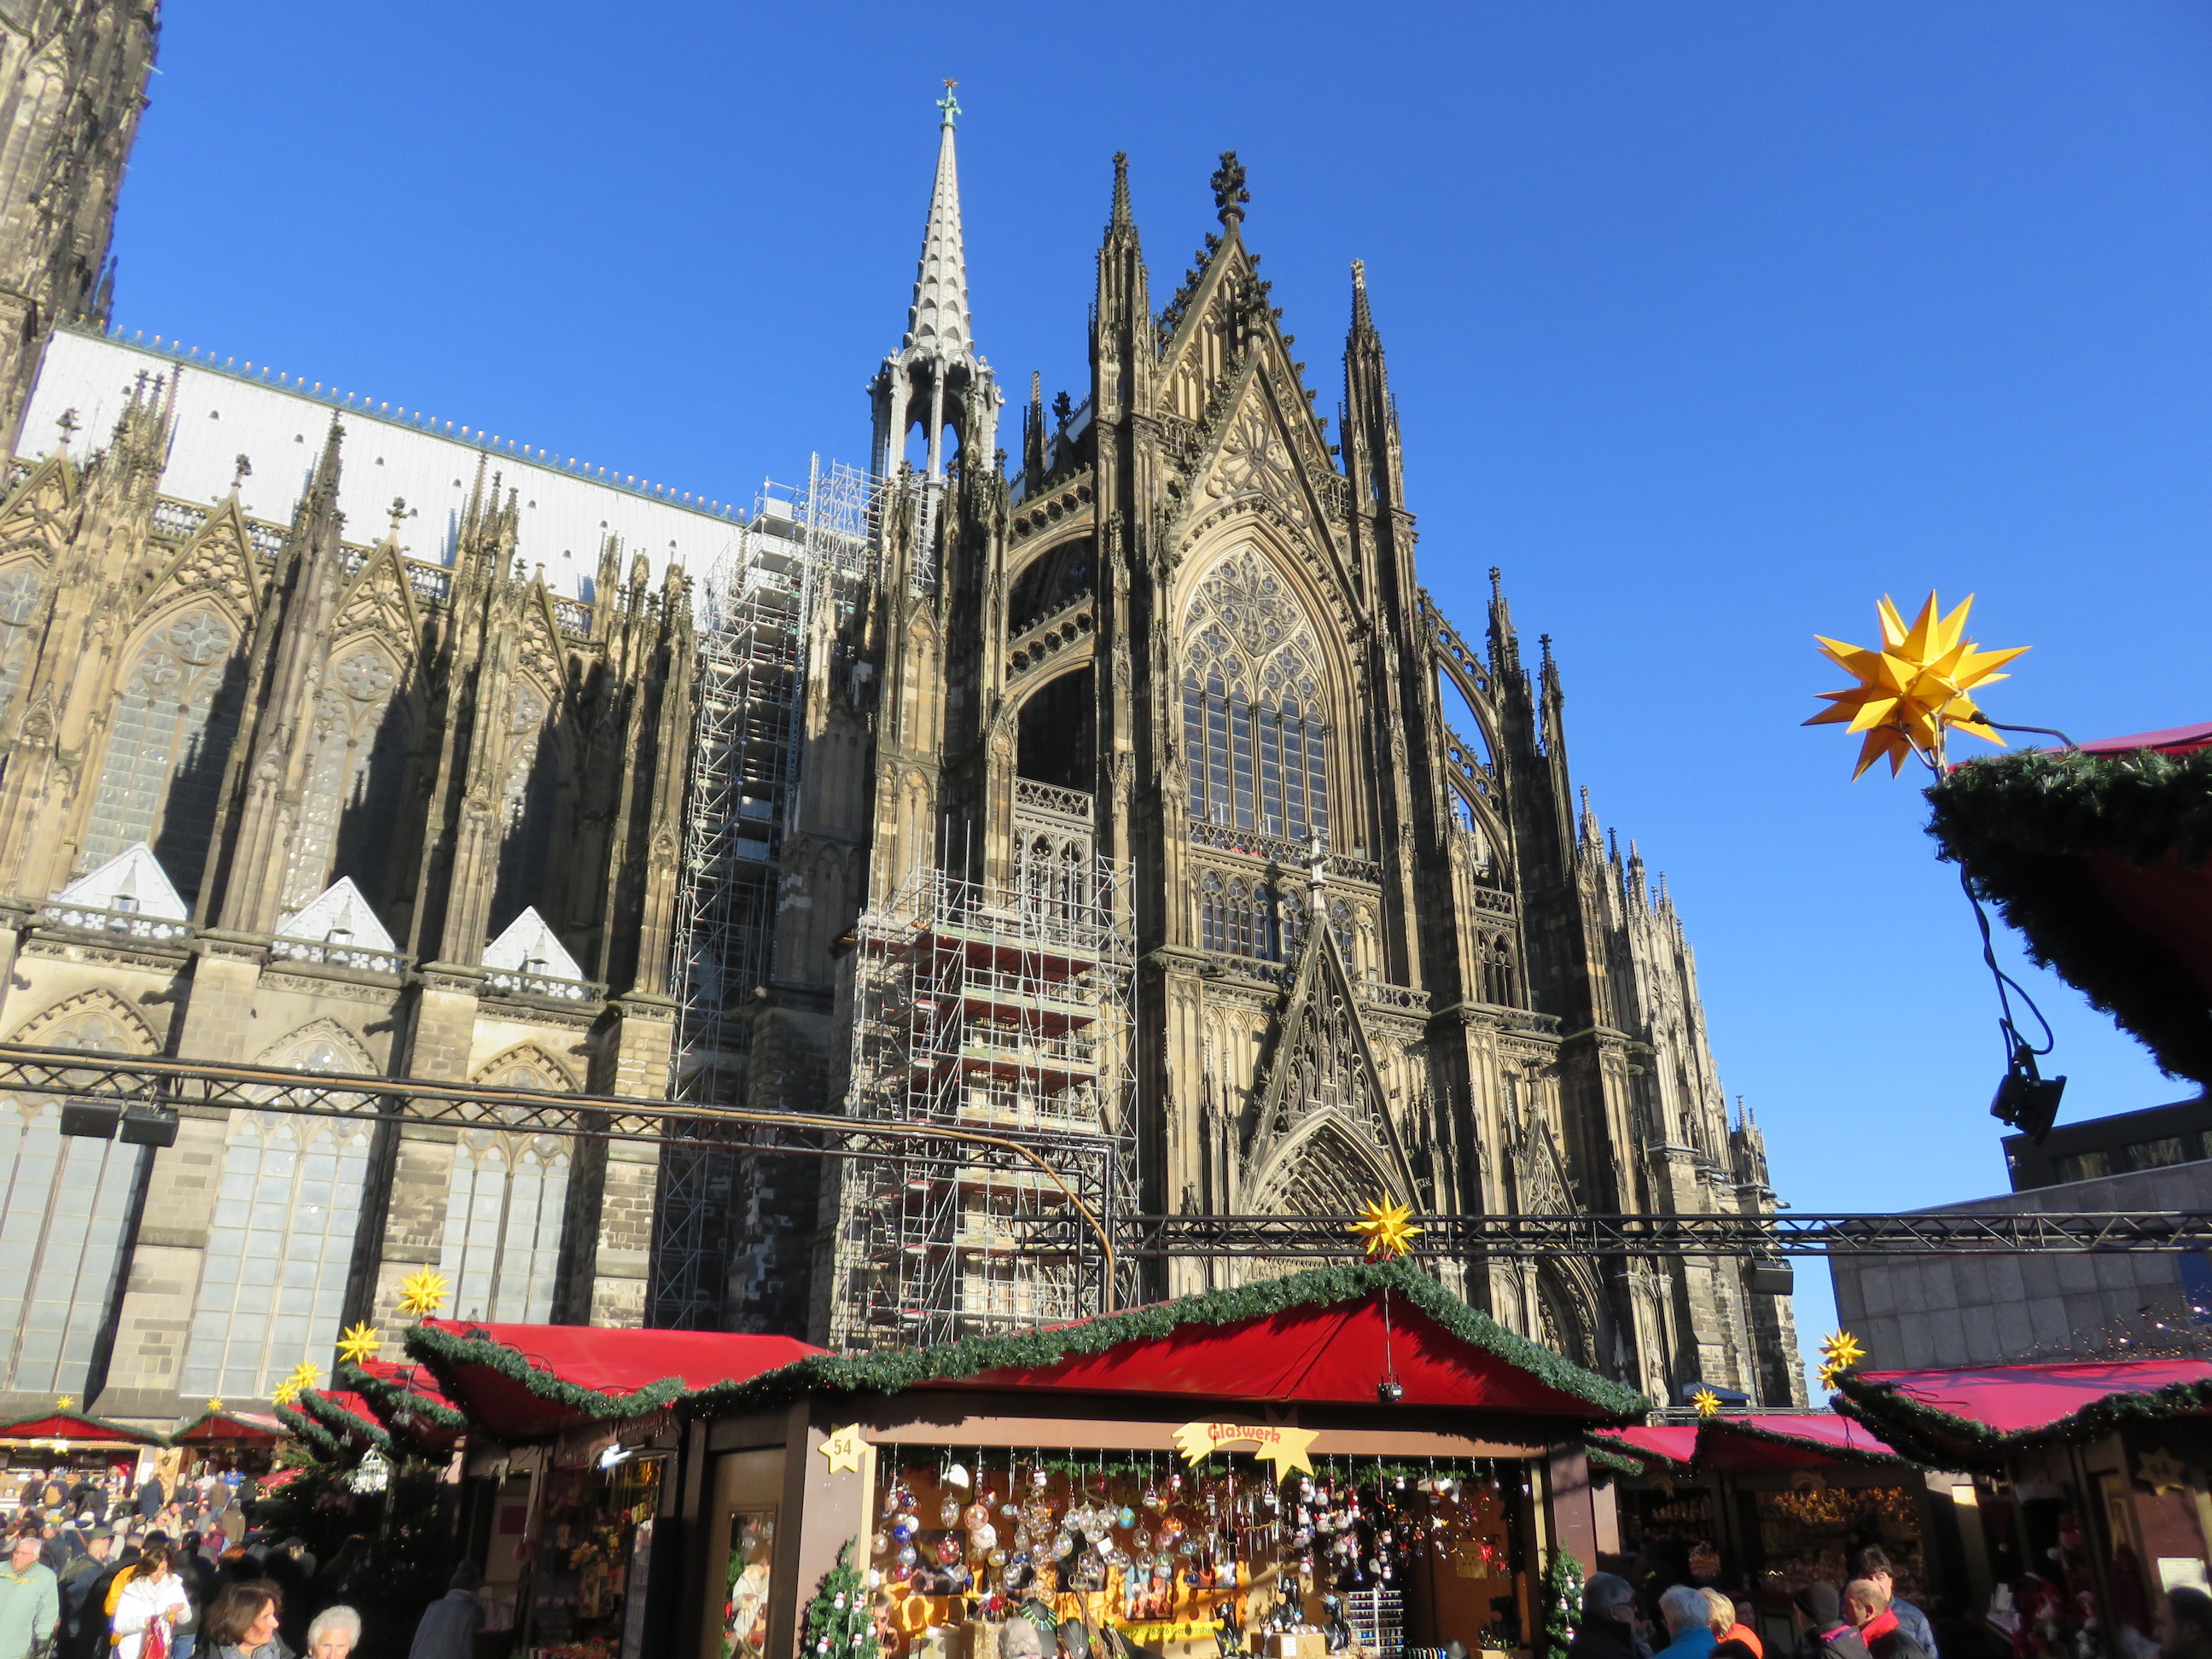 The Cologne Cathedral provides a dramatic backdrop for the Christmas Market in Cologne, Germany